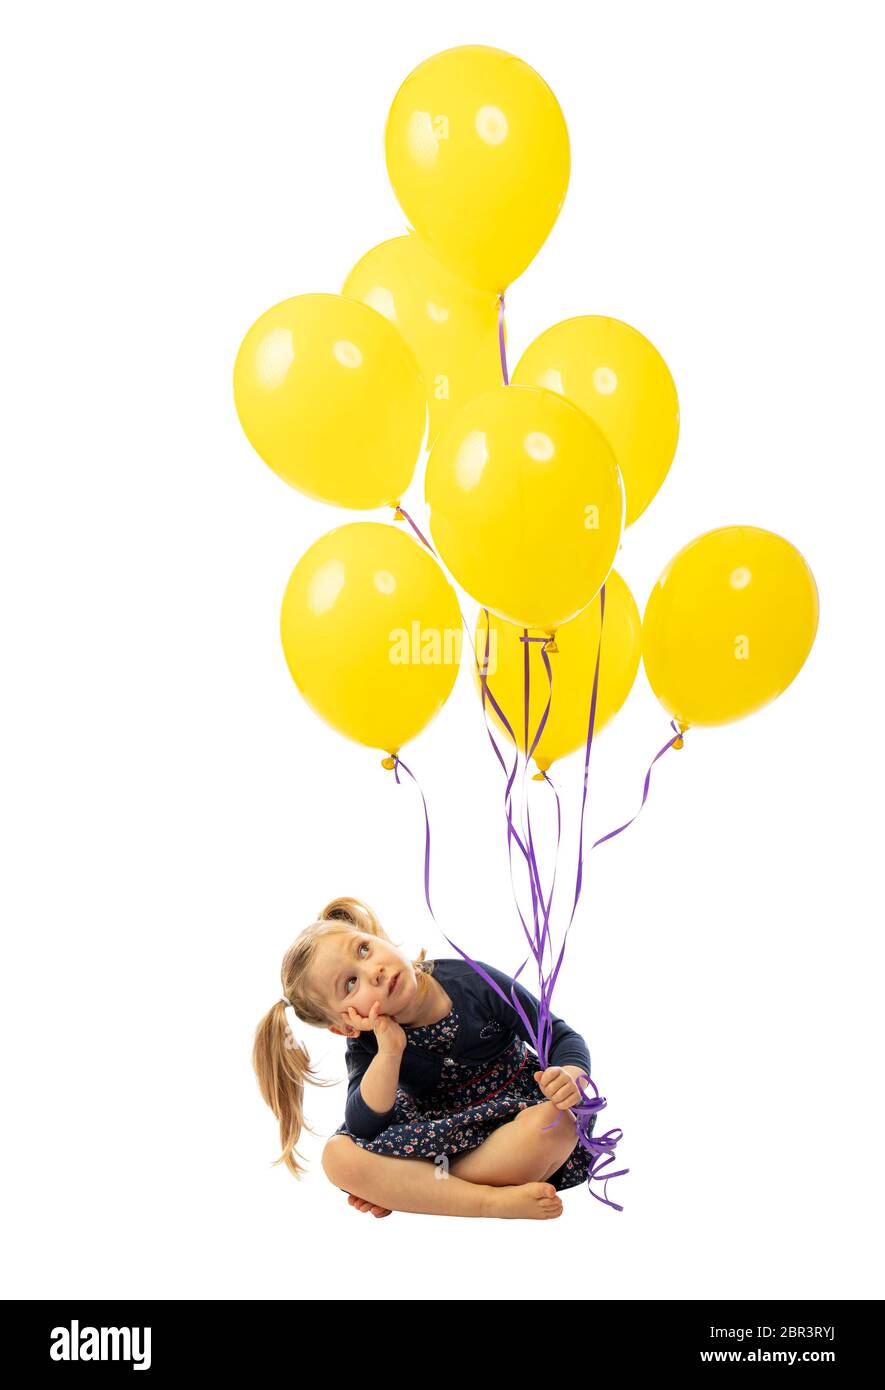 sitting little girl holding yellow balloons in her hand. isolated on white. hair with pigtails, bored expression. Stock Photo